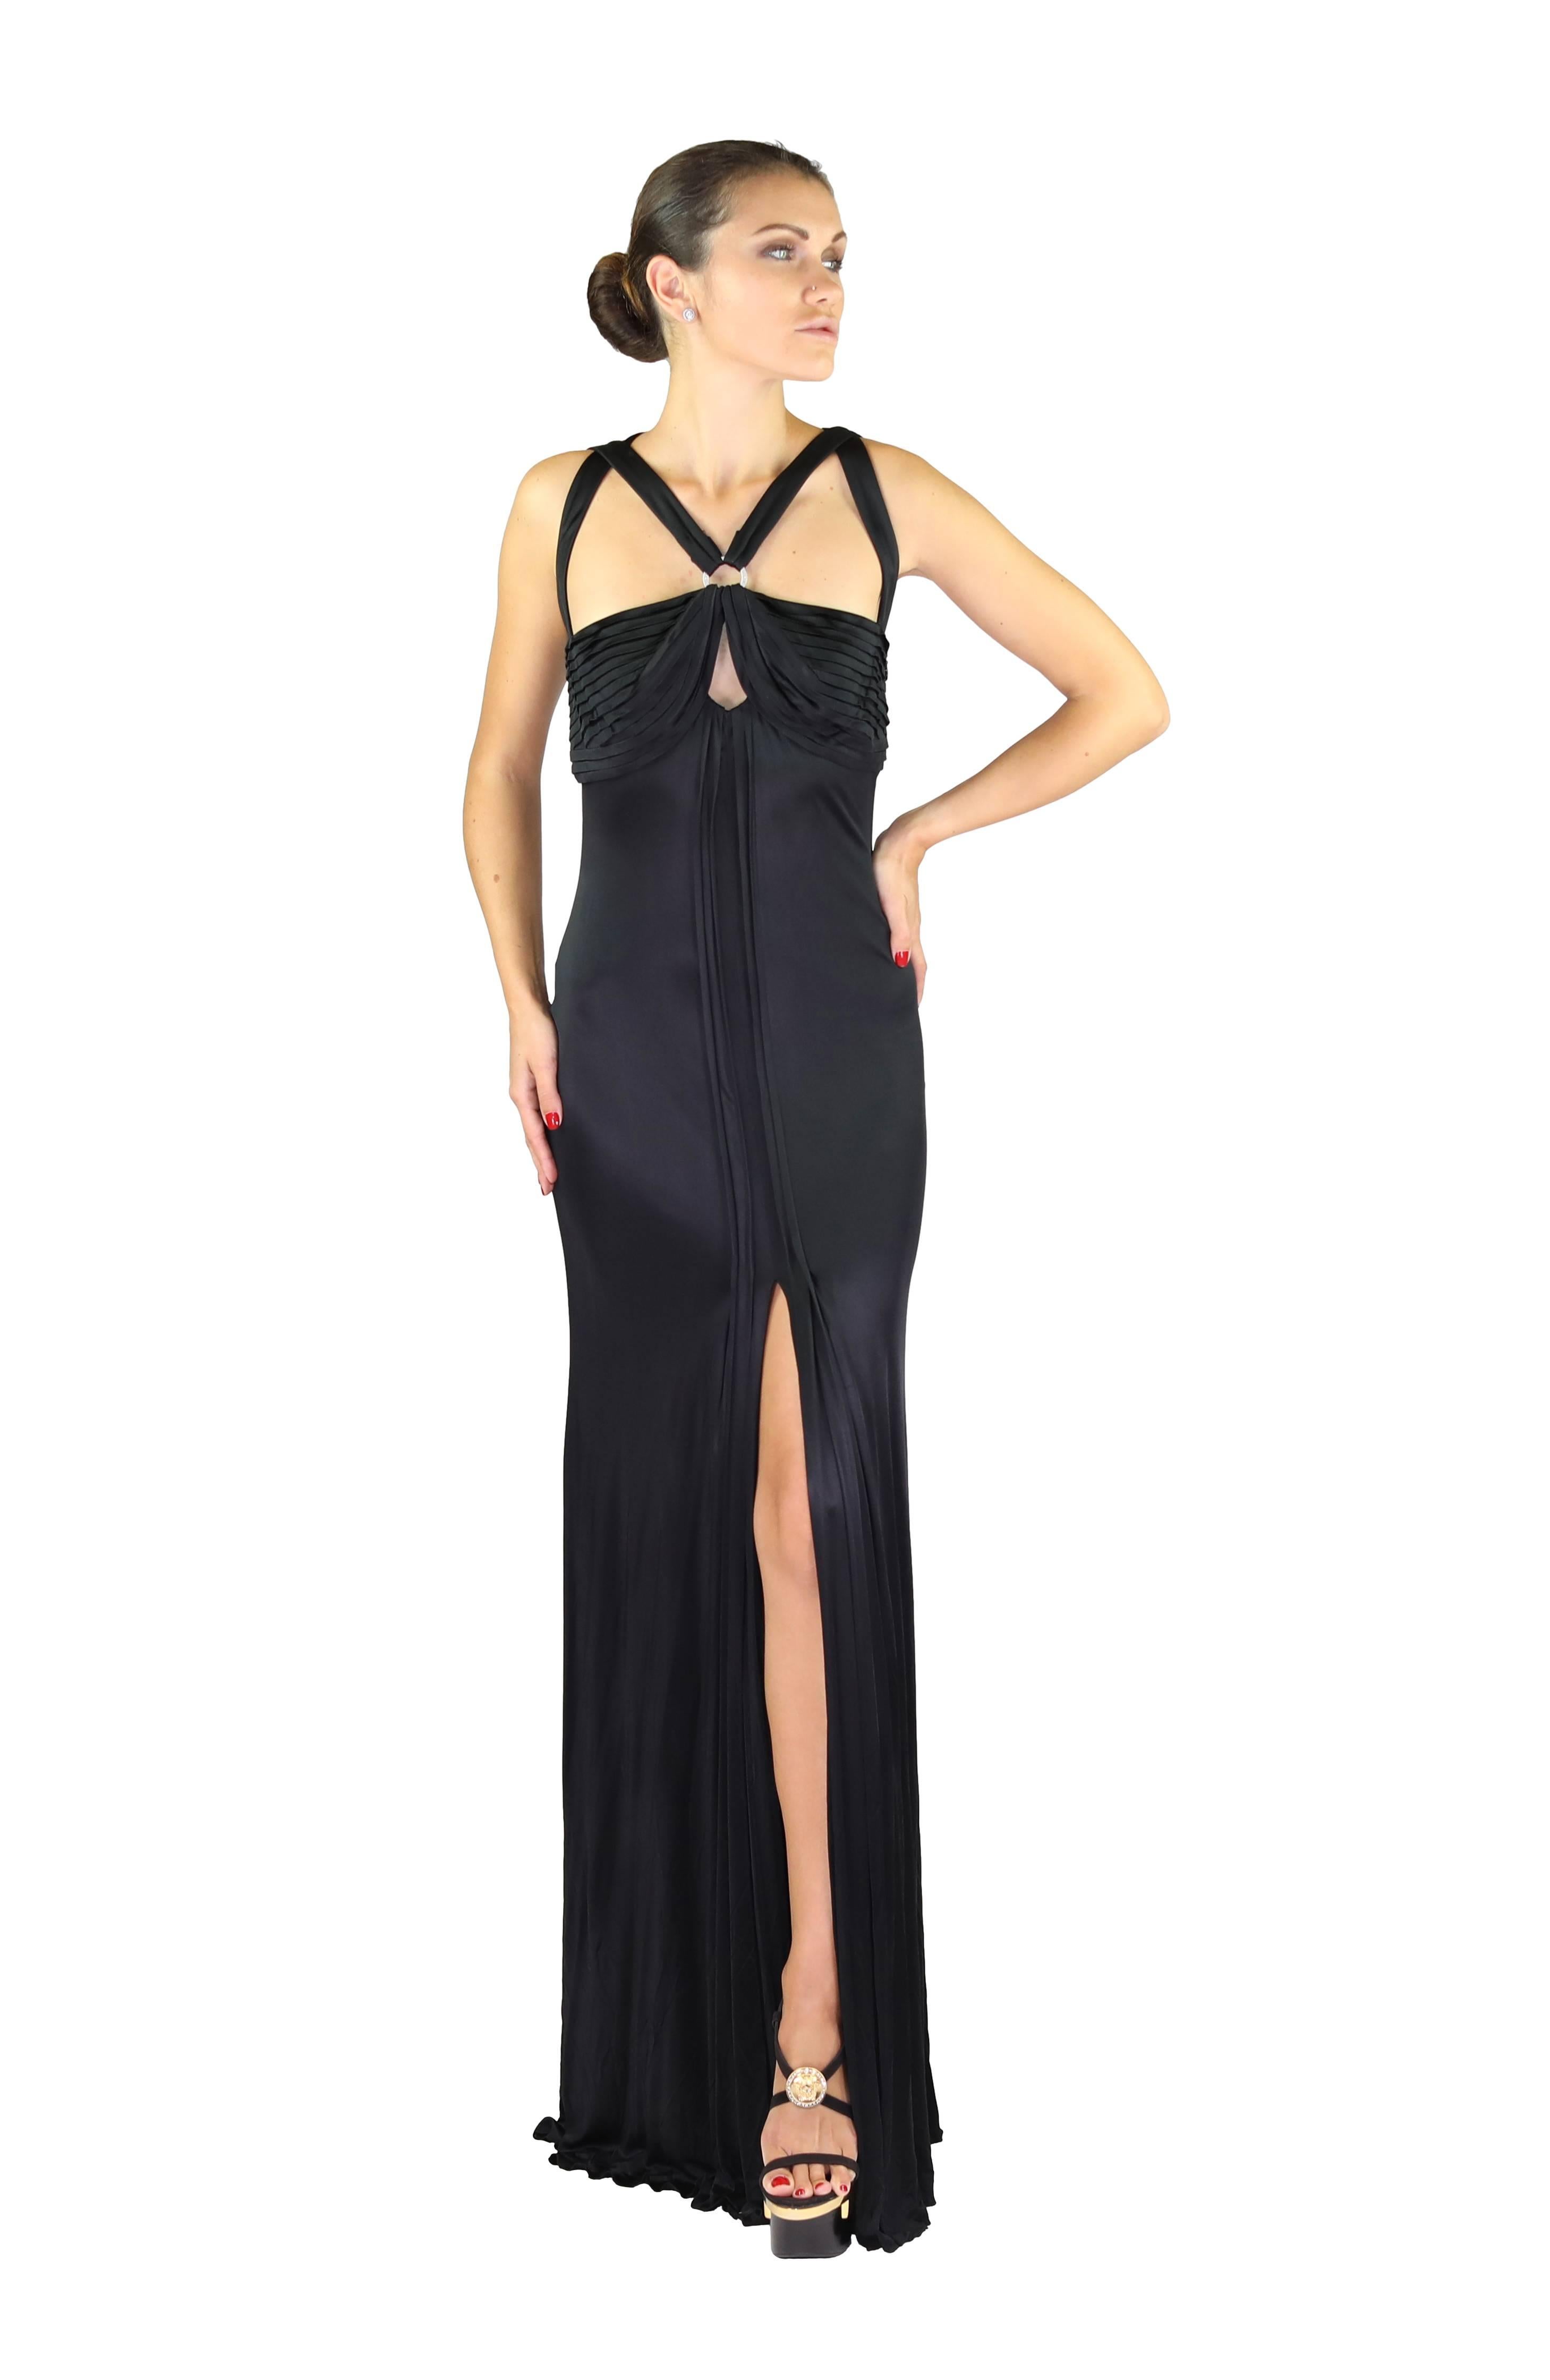  VERSACE BLACK STRETCH-JERSEY OPEN BACK GOWN

Cut from smooth satin-jersey in 'Jet Black', this gown has slim silhouette and finished with silver hardware. 
Deep front slit
Straps
Low scooped back
Silver Rings spell VERSACE

Brand New. Tags